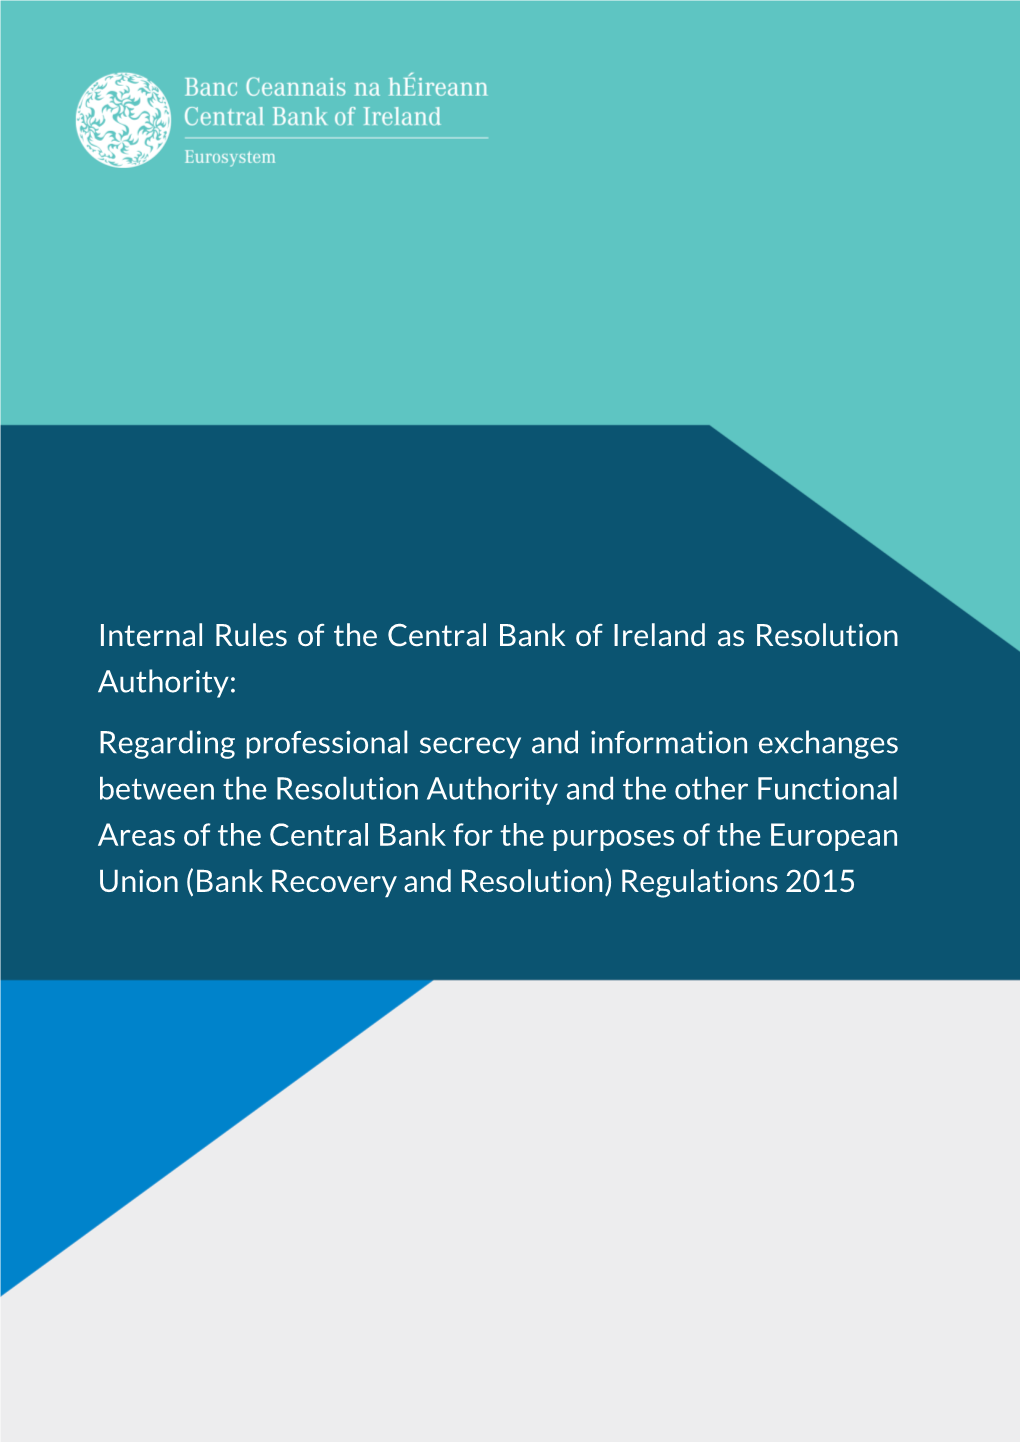 Internal Rules of the Central Bank of Ireland As Resolution Authority